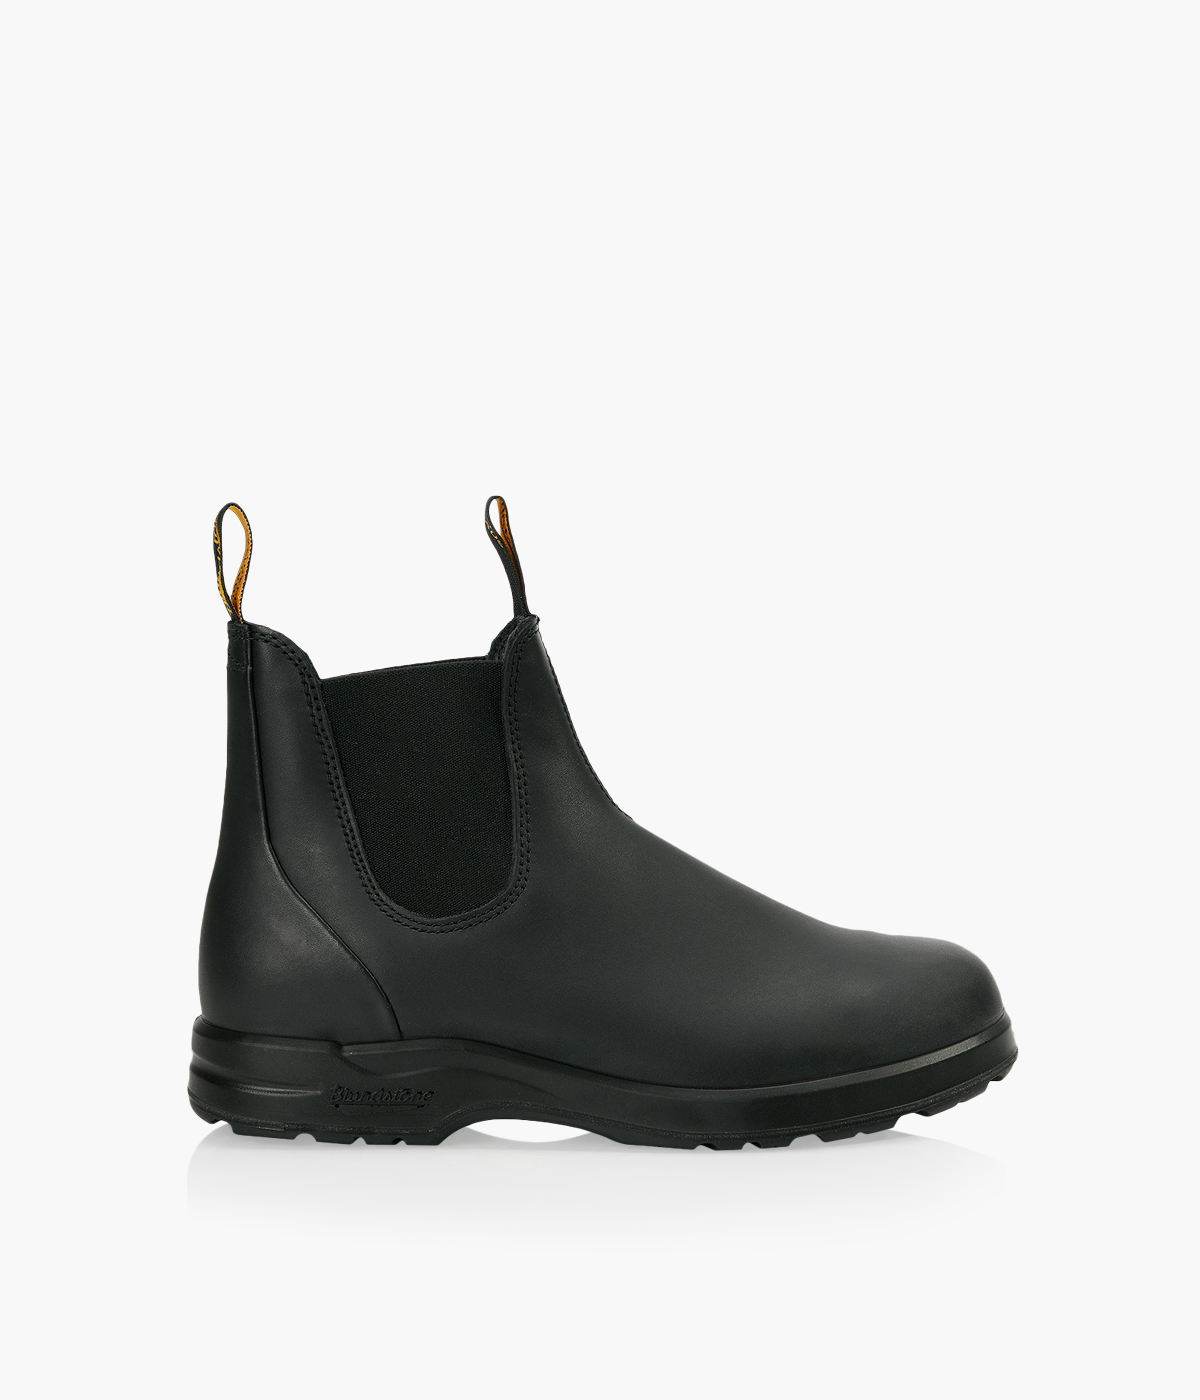 BLUNDSTONE VIBRAM 2058 - Black Patent Leather | Browns Shoes